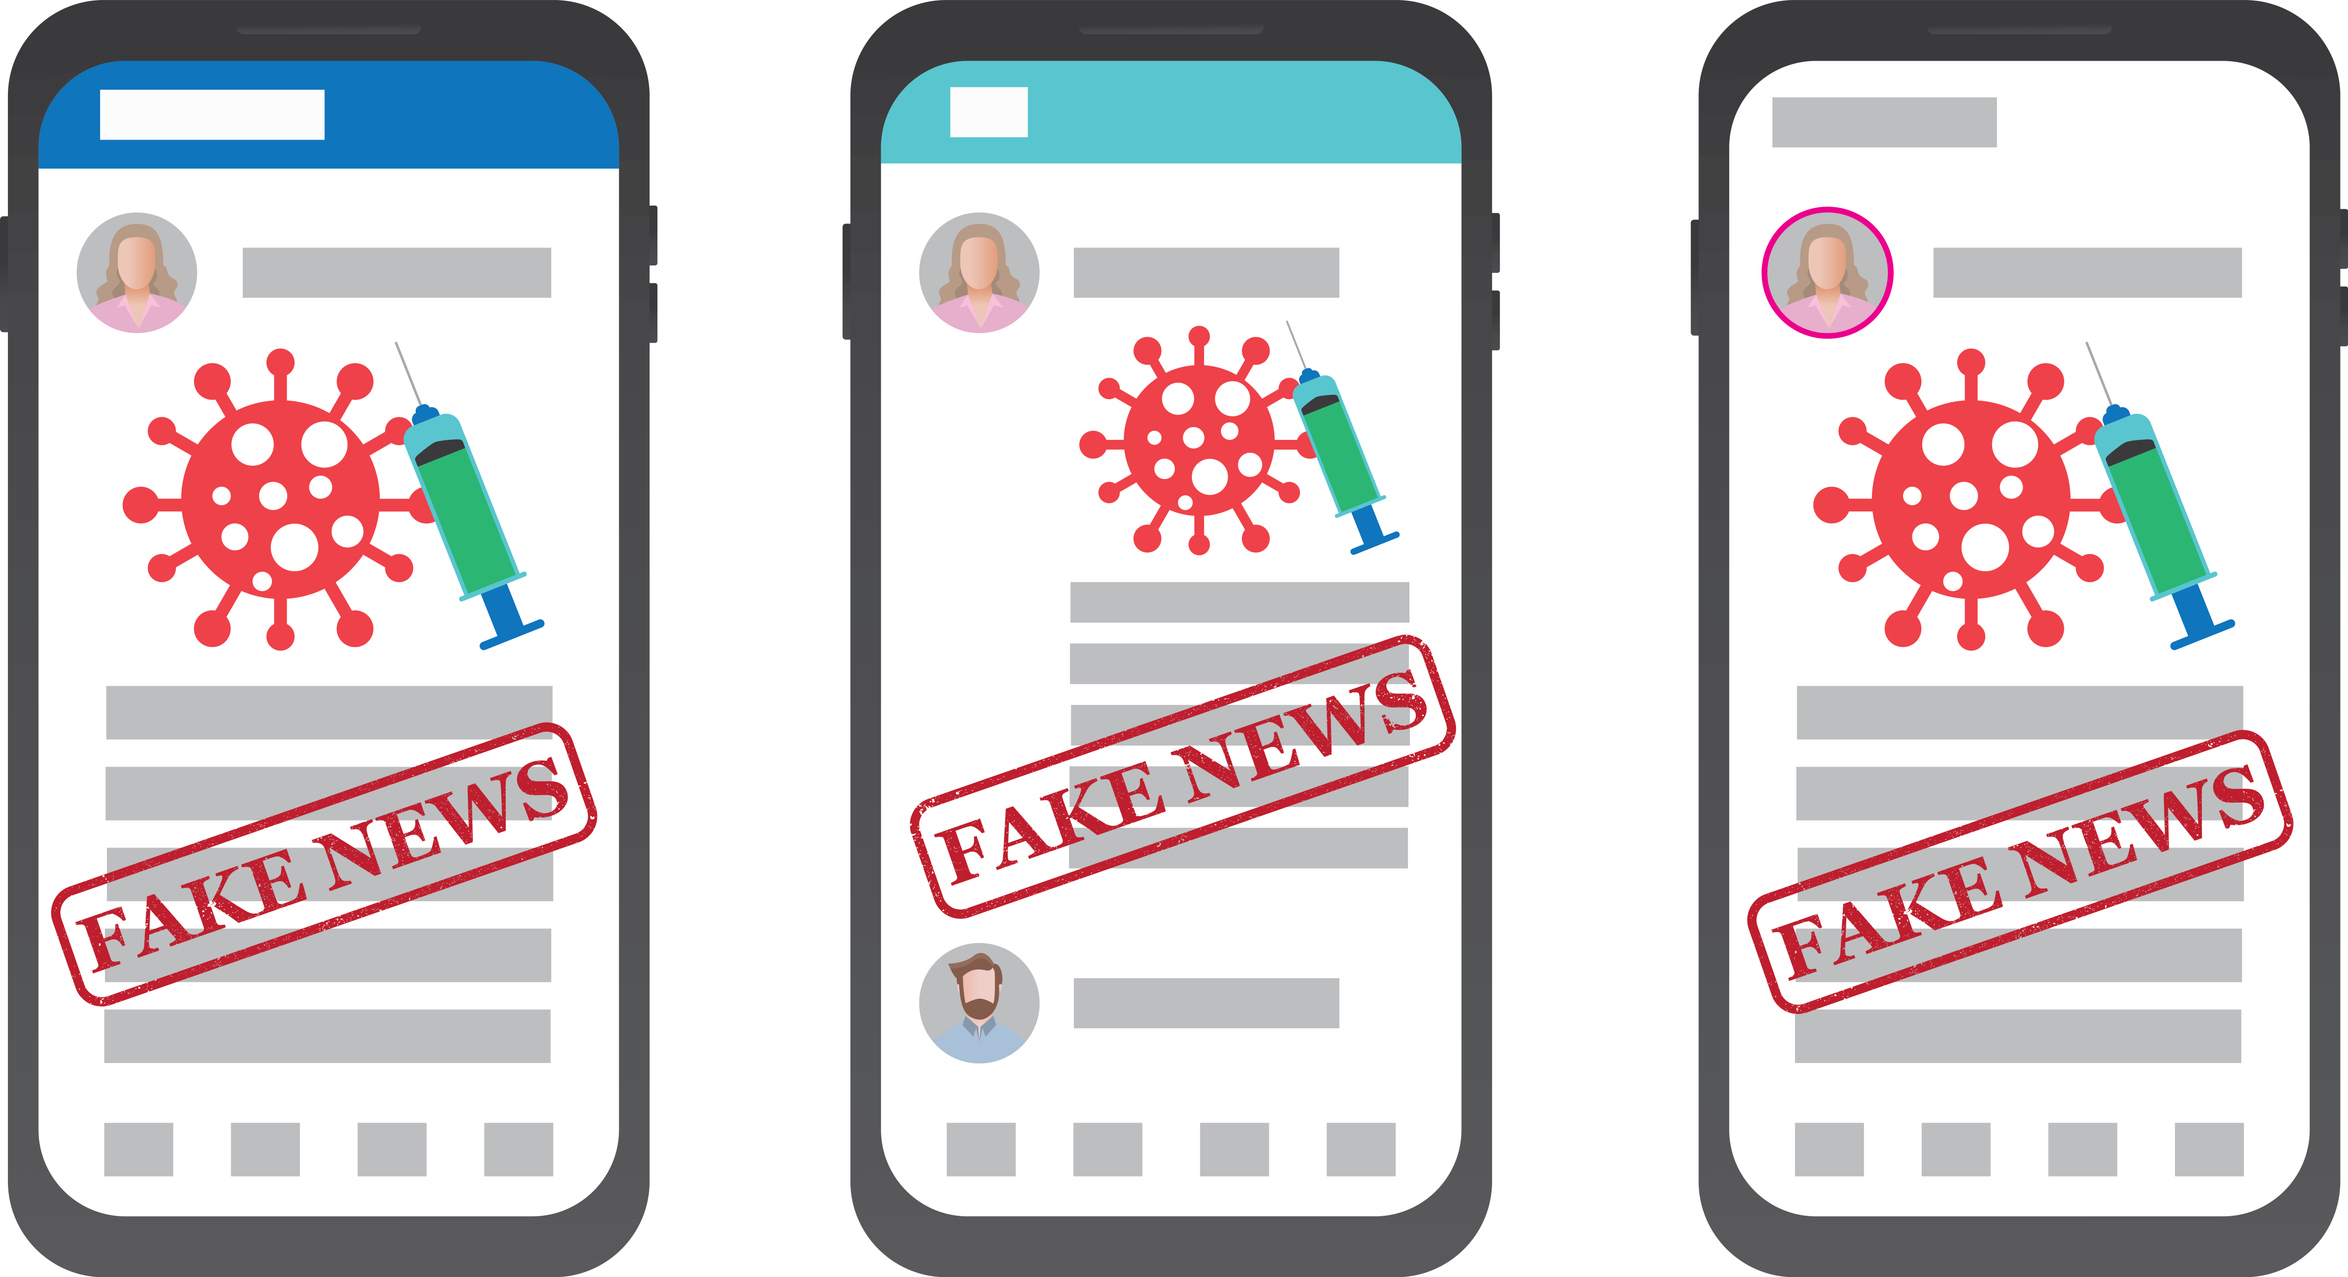 Misleading COVID-19 headlines from mainstream sources did more harm on Facebook than fake news